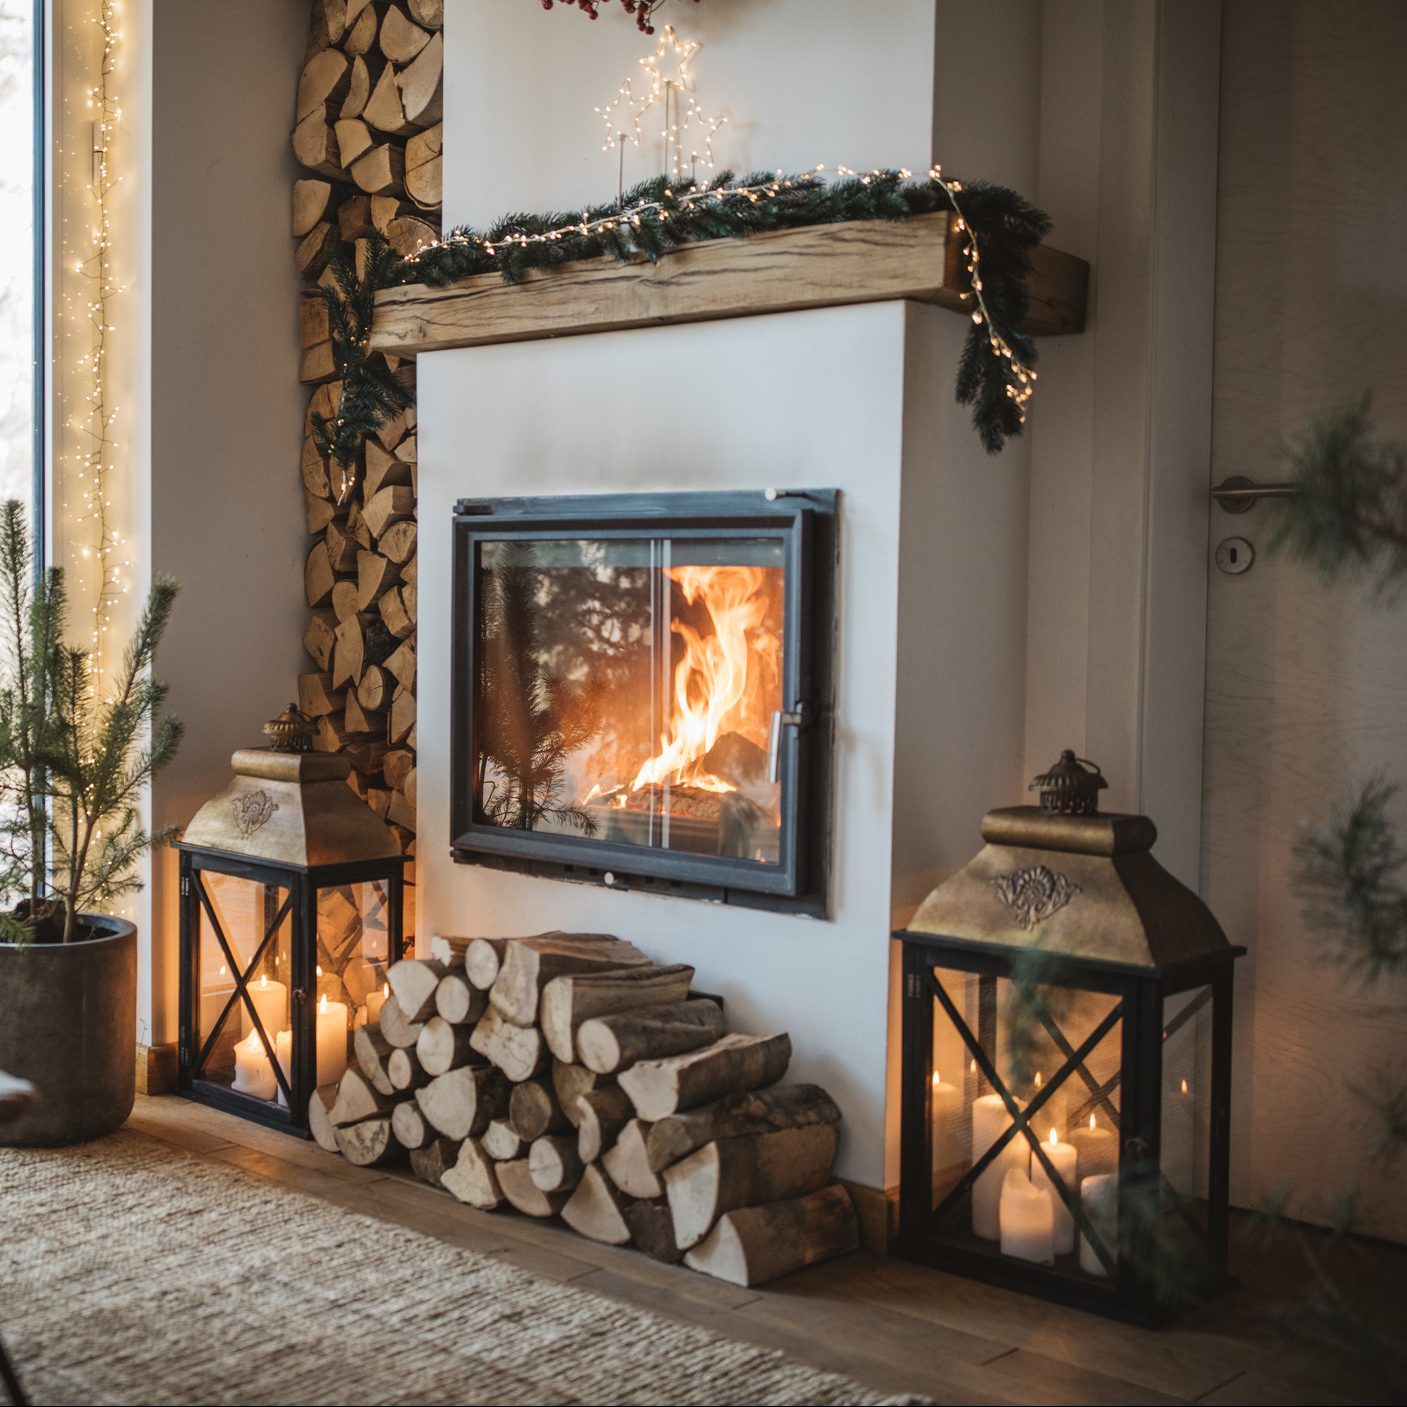 9 Ways To Increase the Heat From Your Wood-Burning Fireplace